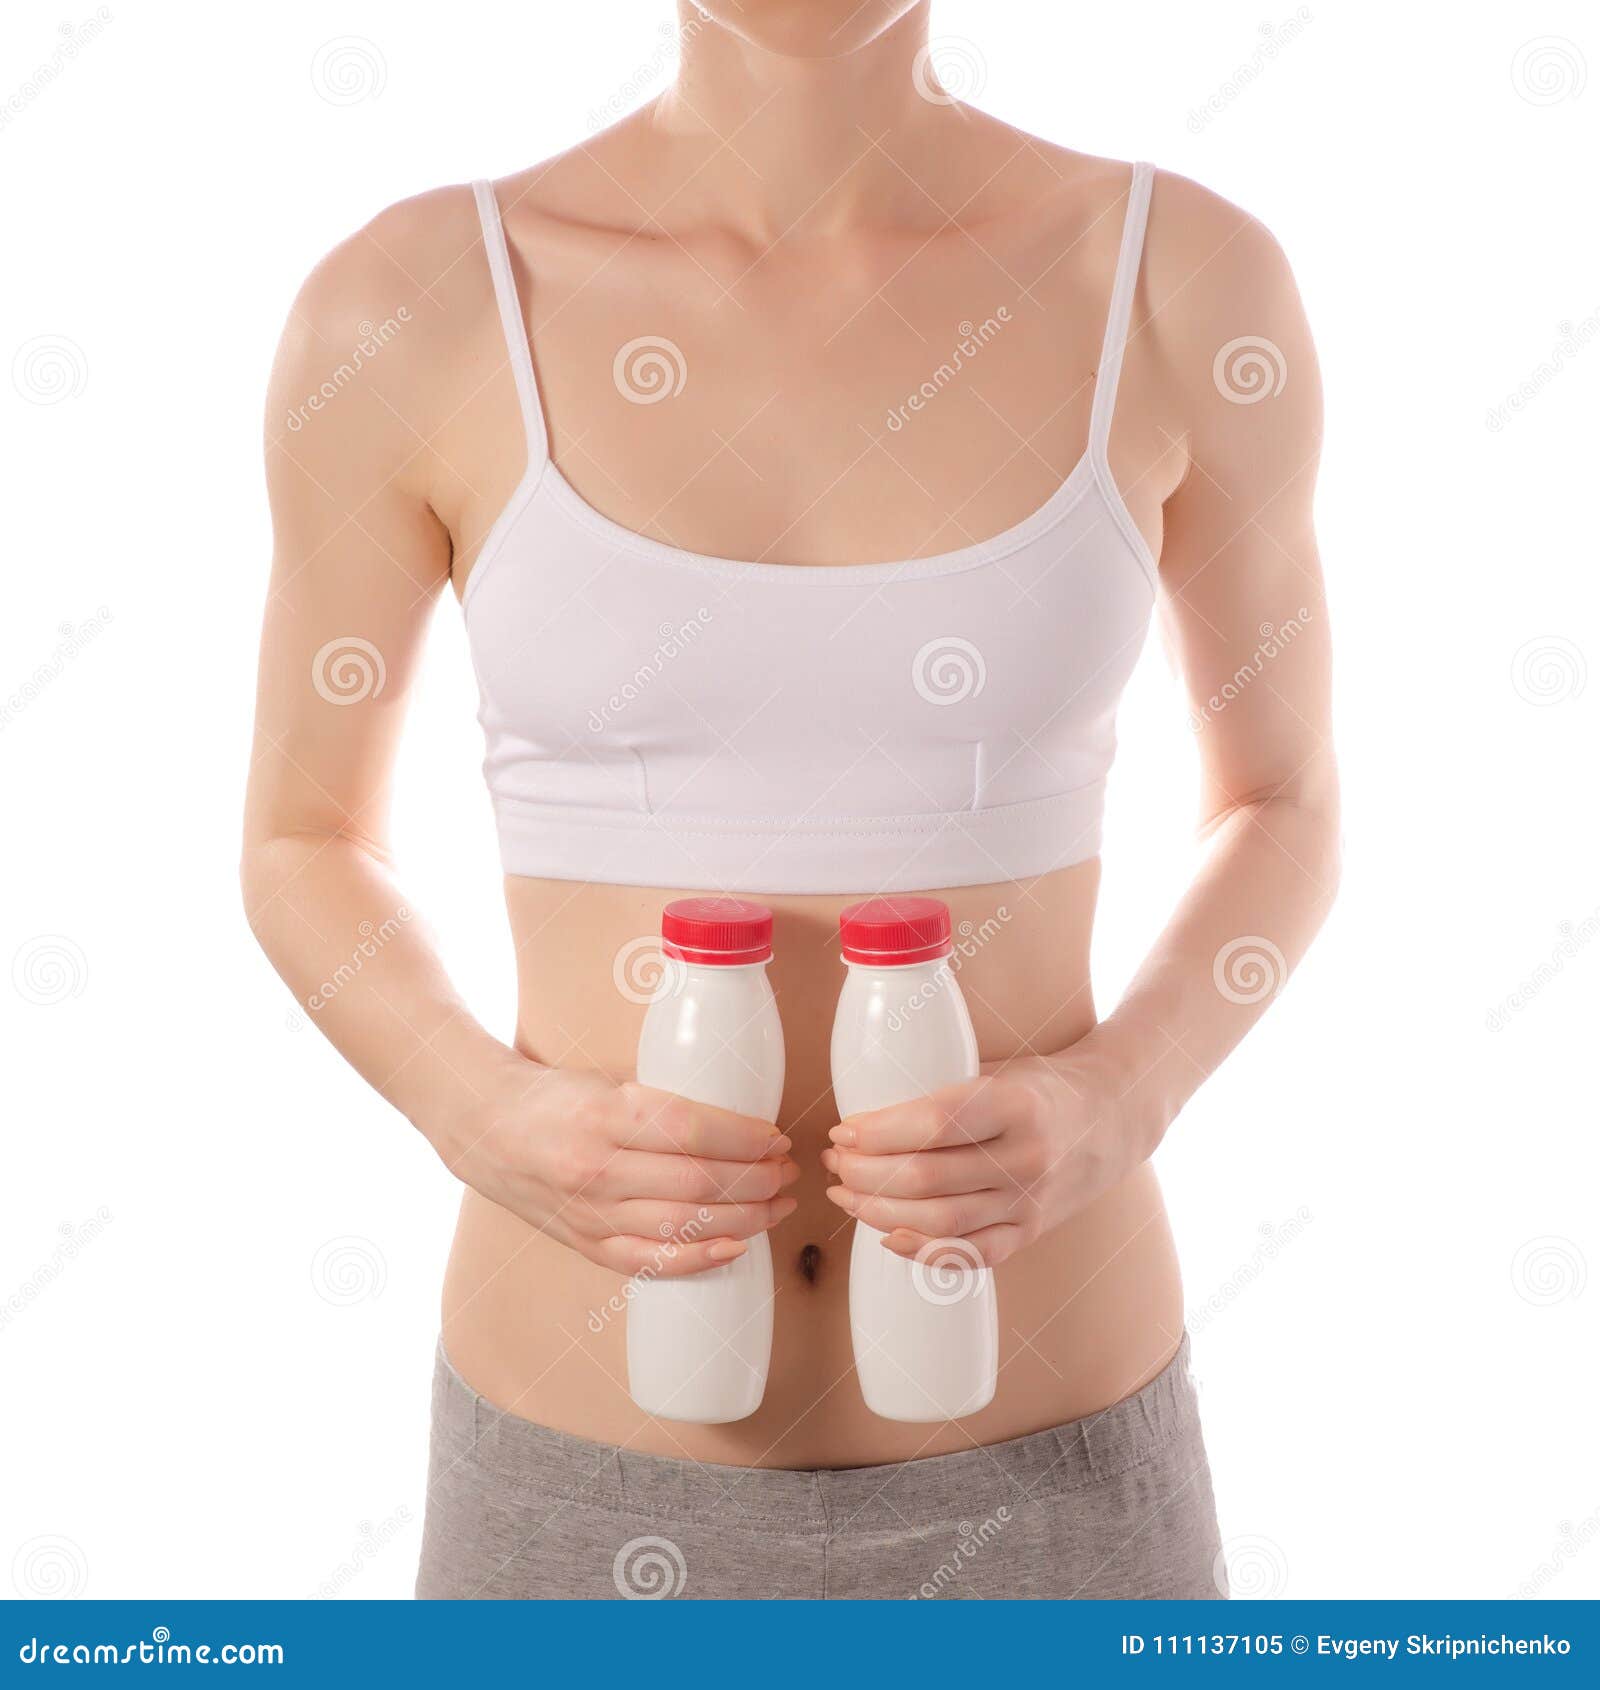 Young Beautiful Woman in a White T-shirt Top Stomach in Hands a Bottle of  Yogurt Beauty Health Stock Image - Image of fitness, happiness: 111137105